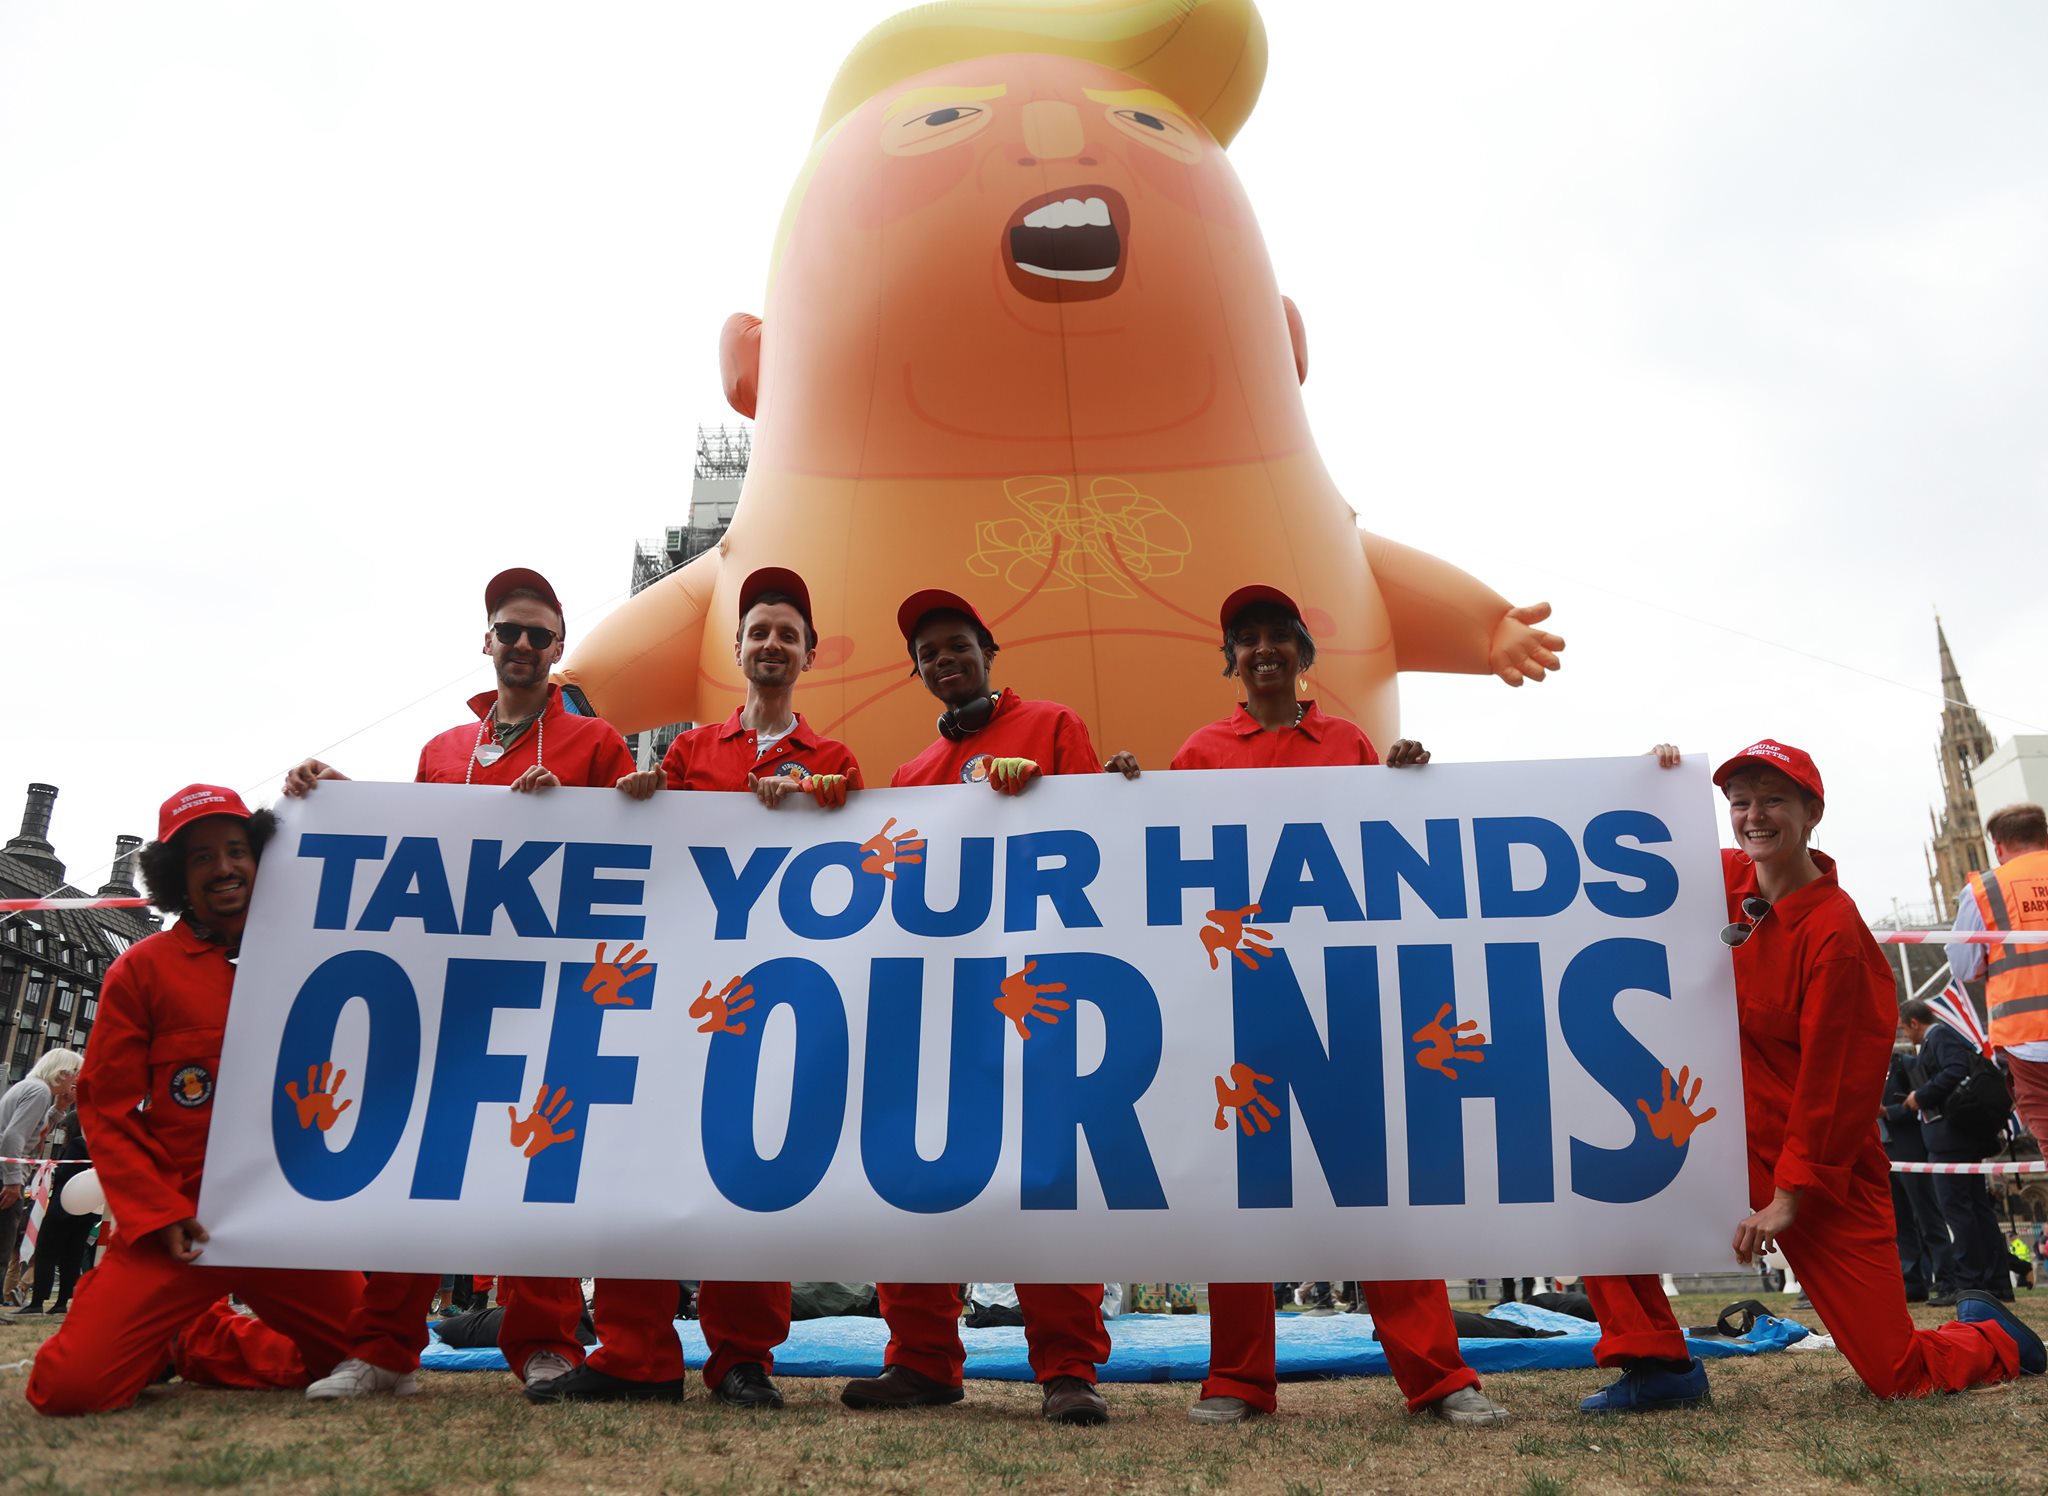 Campaigners in front of a Donald Trump blimp, holding a banner that reads "Take your hands off our NHS"